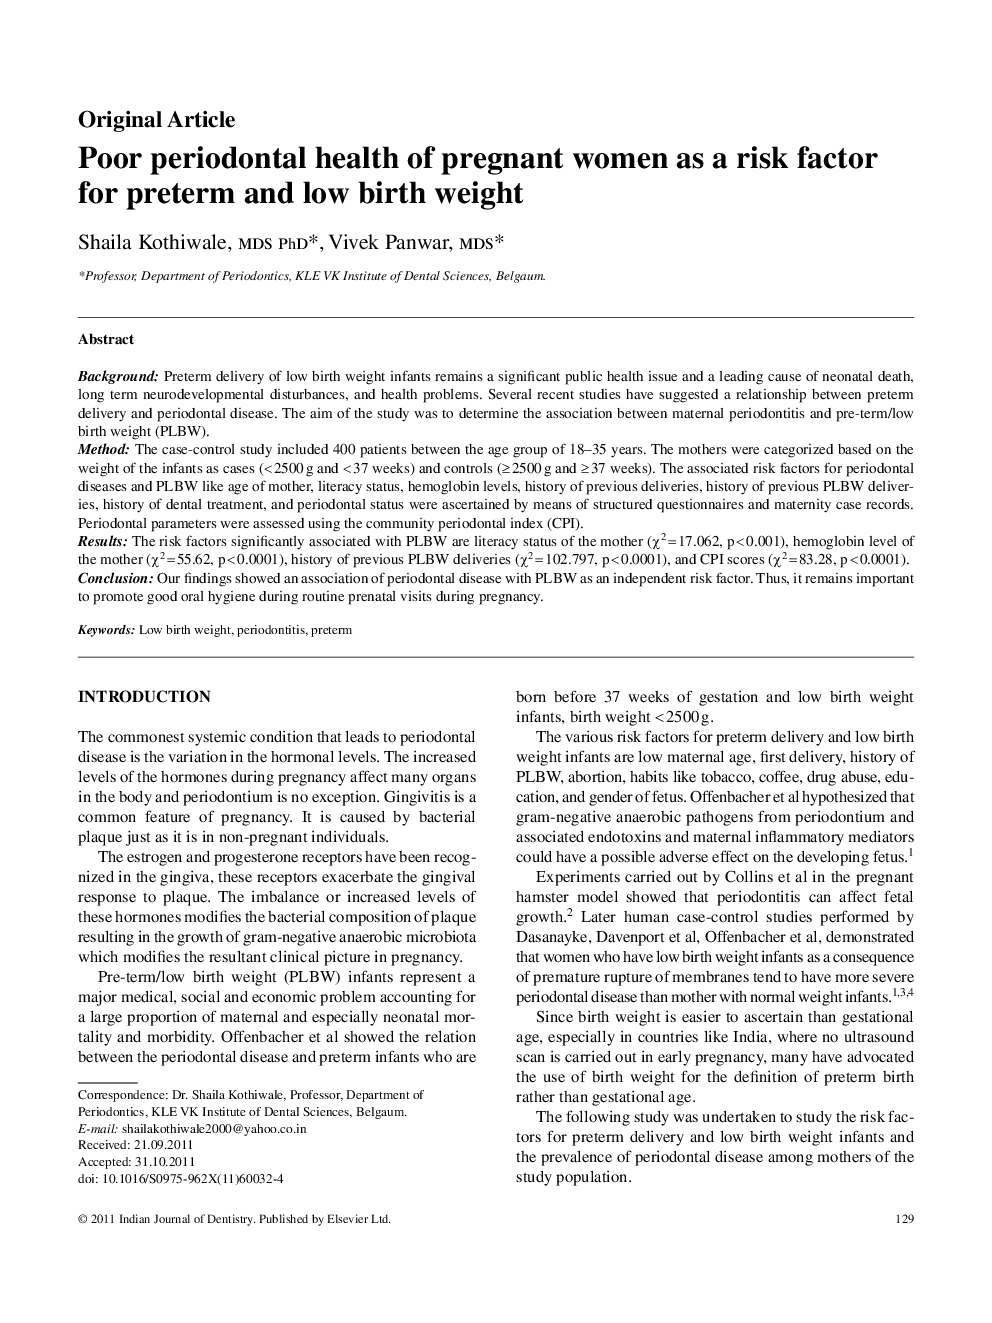 Poor periodontal health of pregnant women as a risk factor for preterm and low birth weight